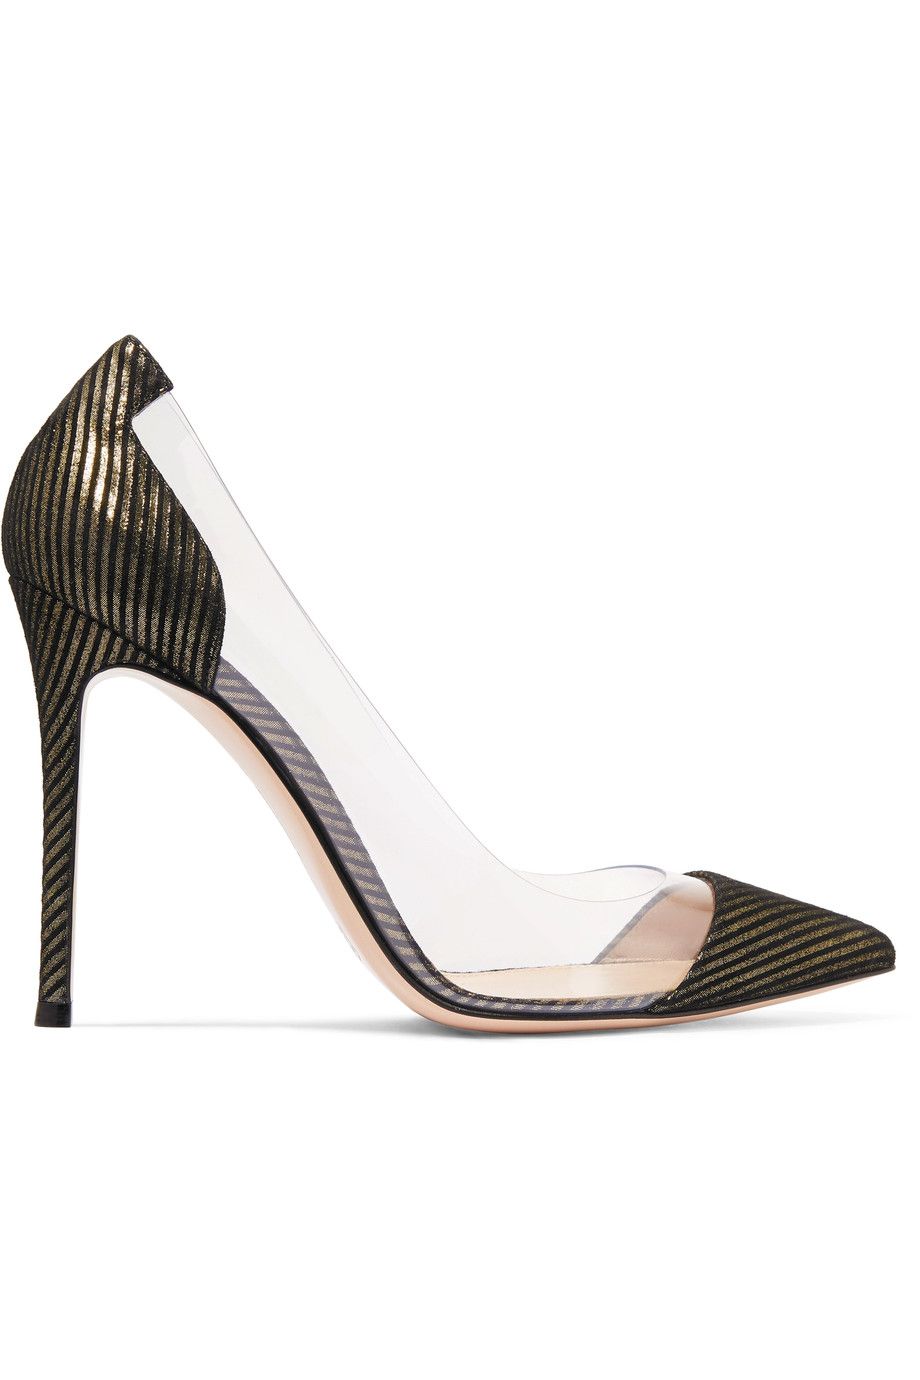 Metallic-striped suede and PVC pumps